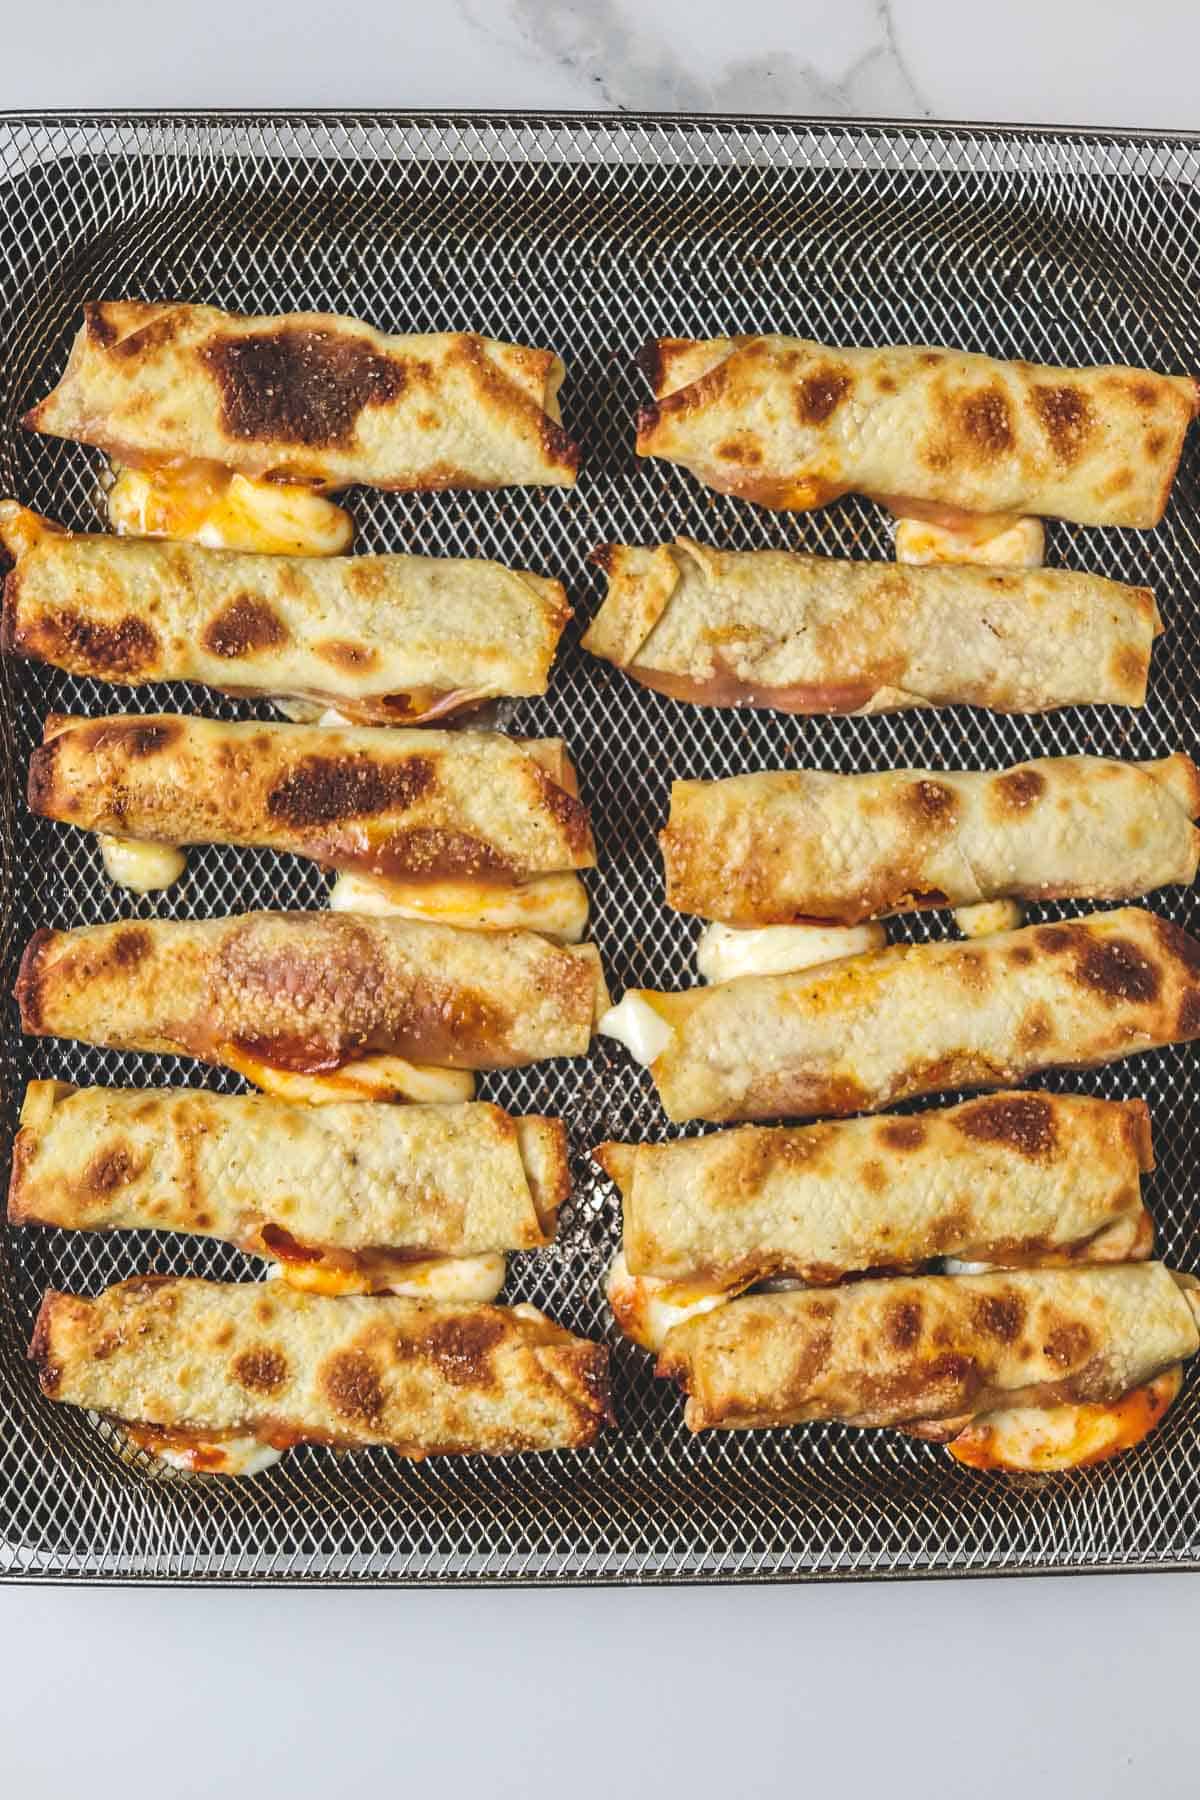 cooked pizza rolls in air fryer basket